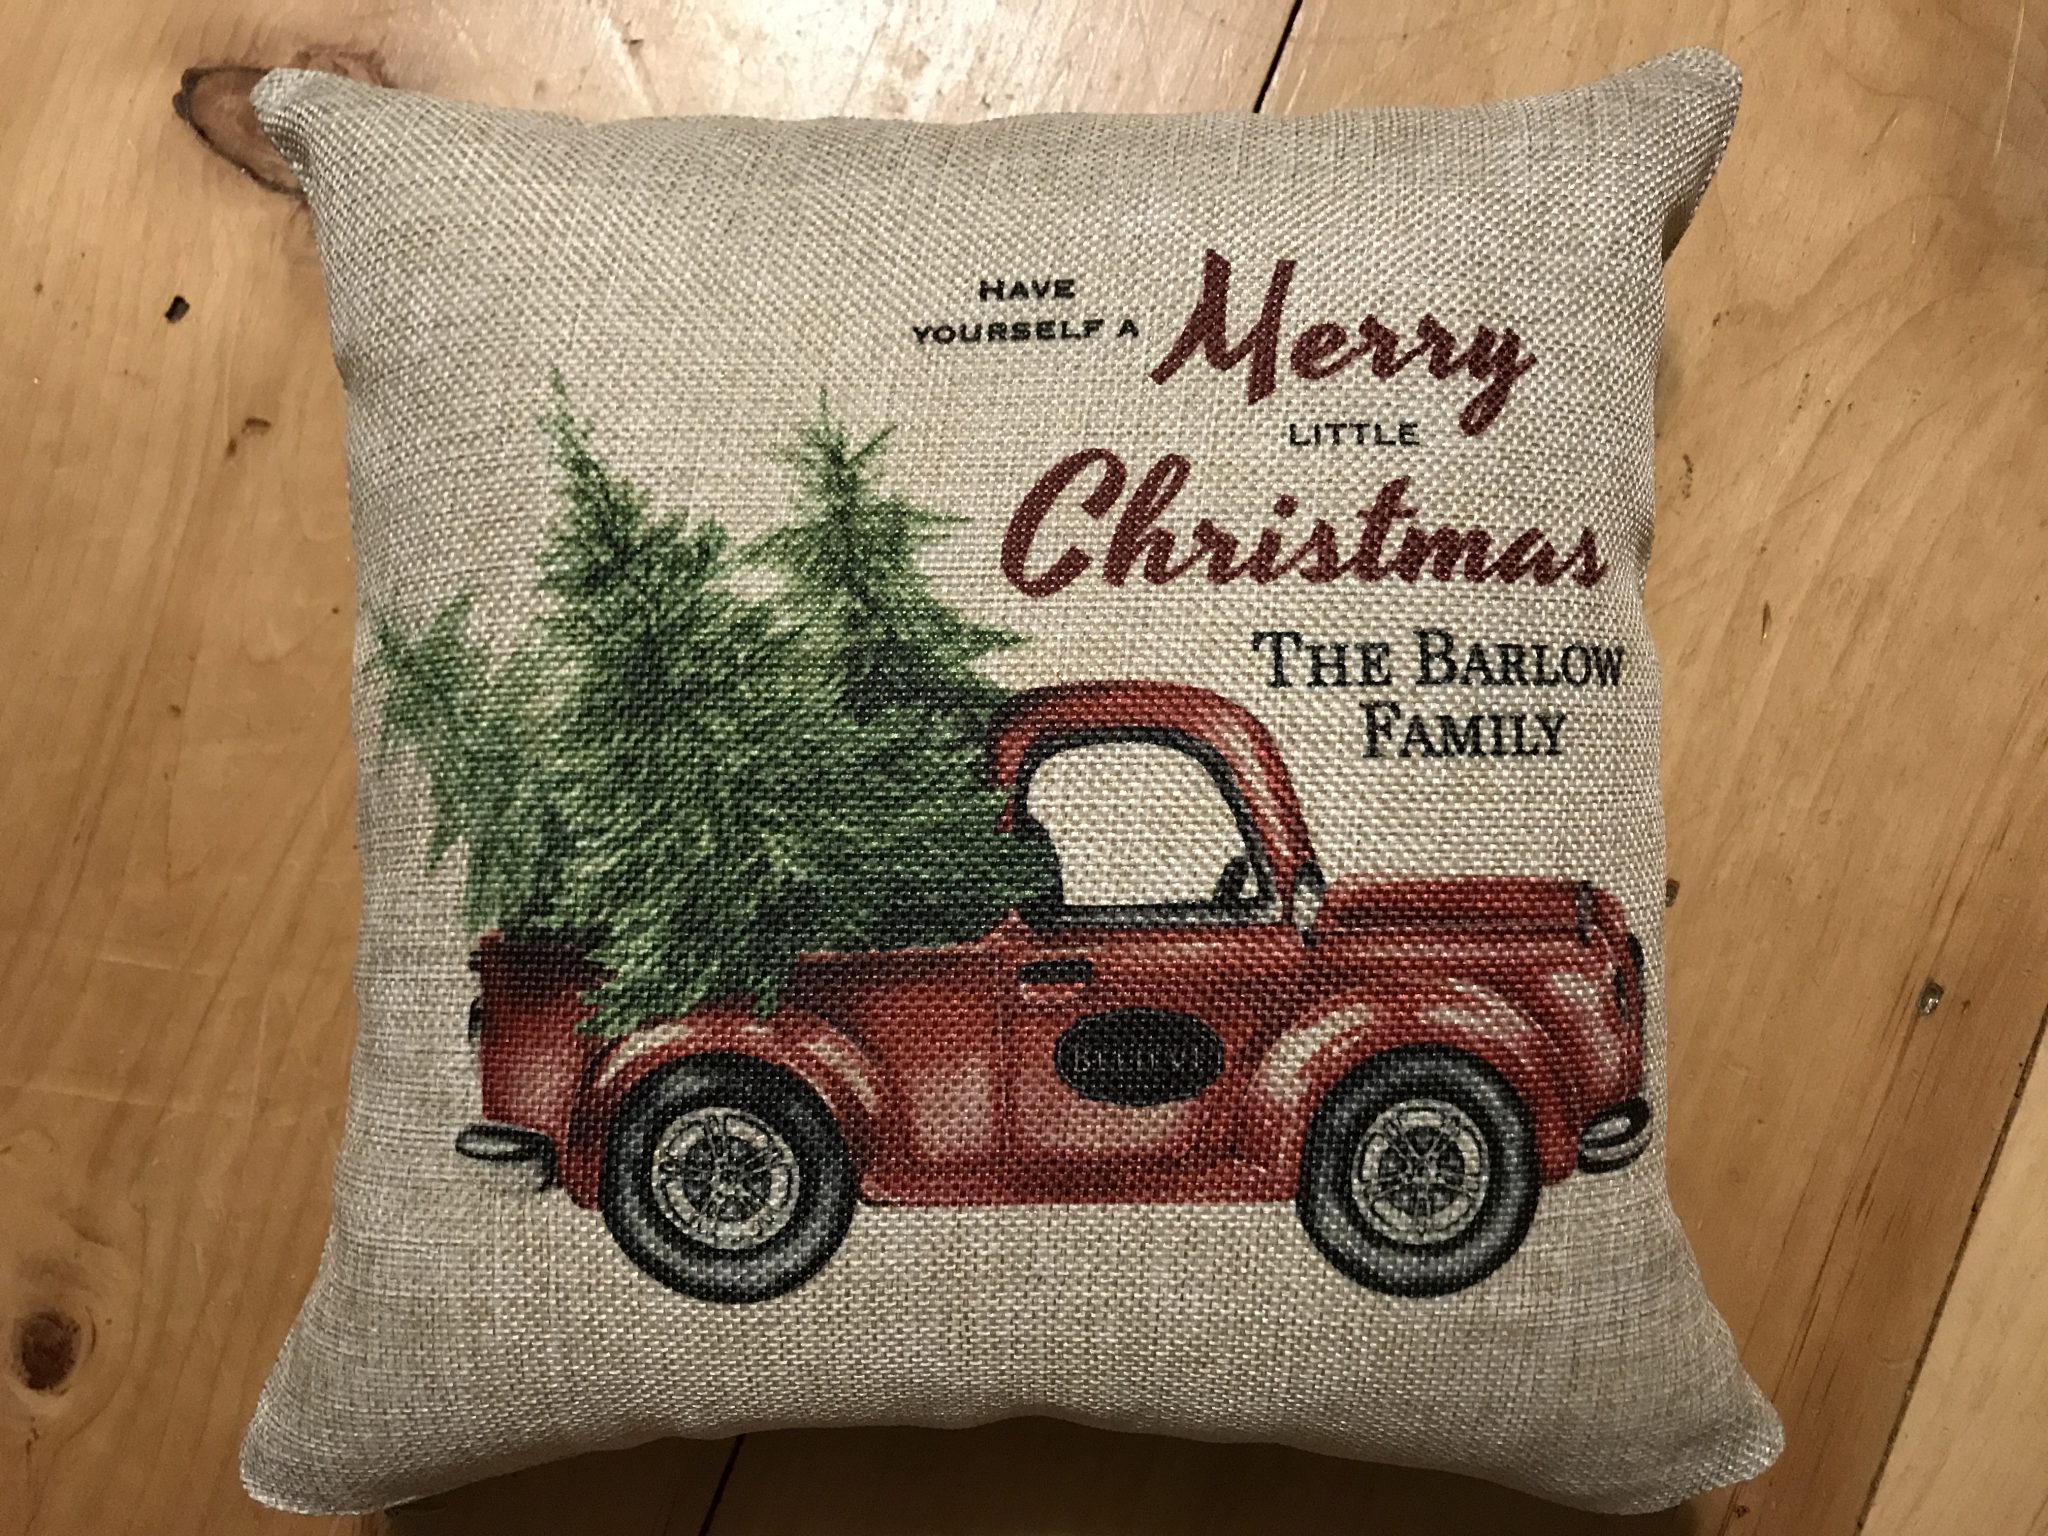 Red Truck with Tree Christmas Accent Pillow